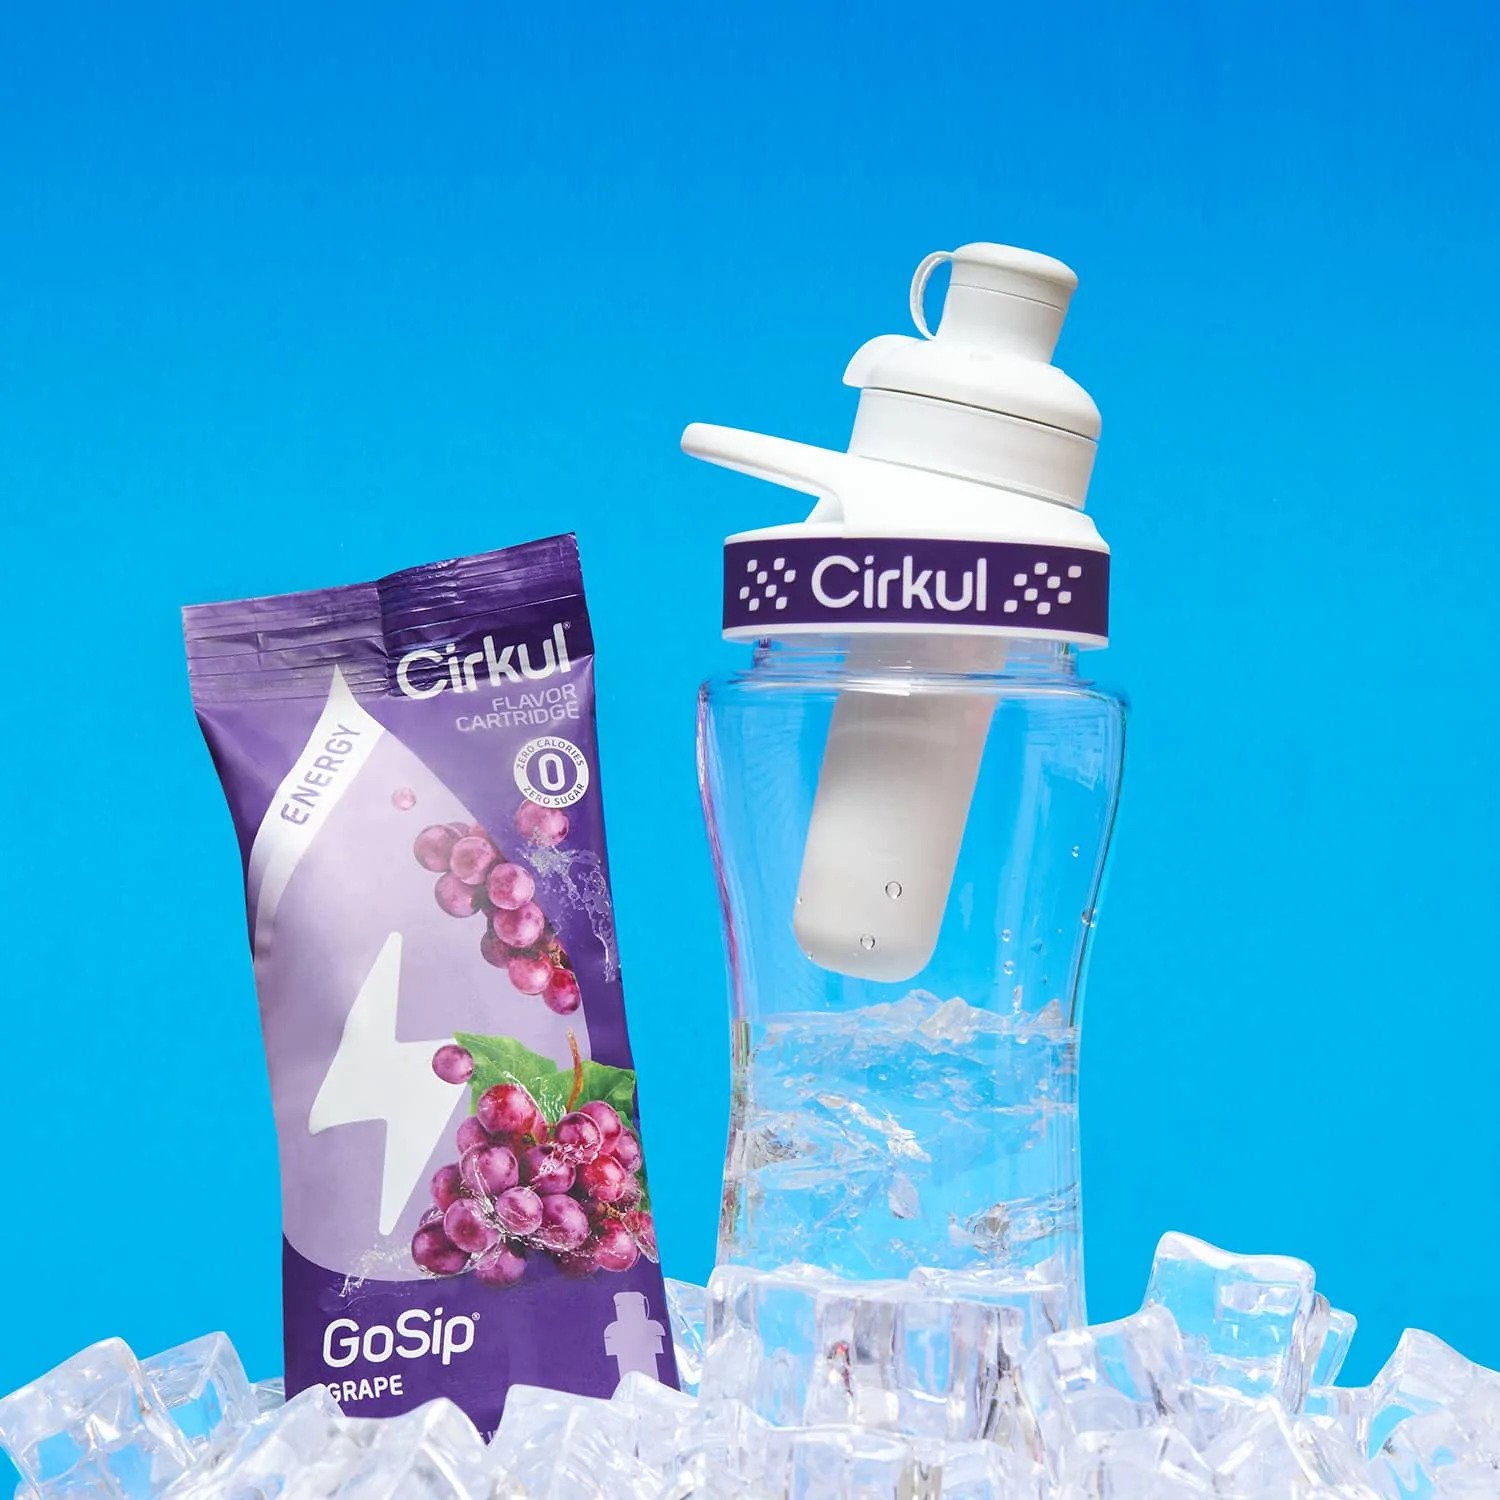 Say Hello To Cirkul: All-Natural Flavor That Turns Water From Boring ...